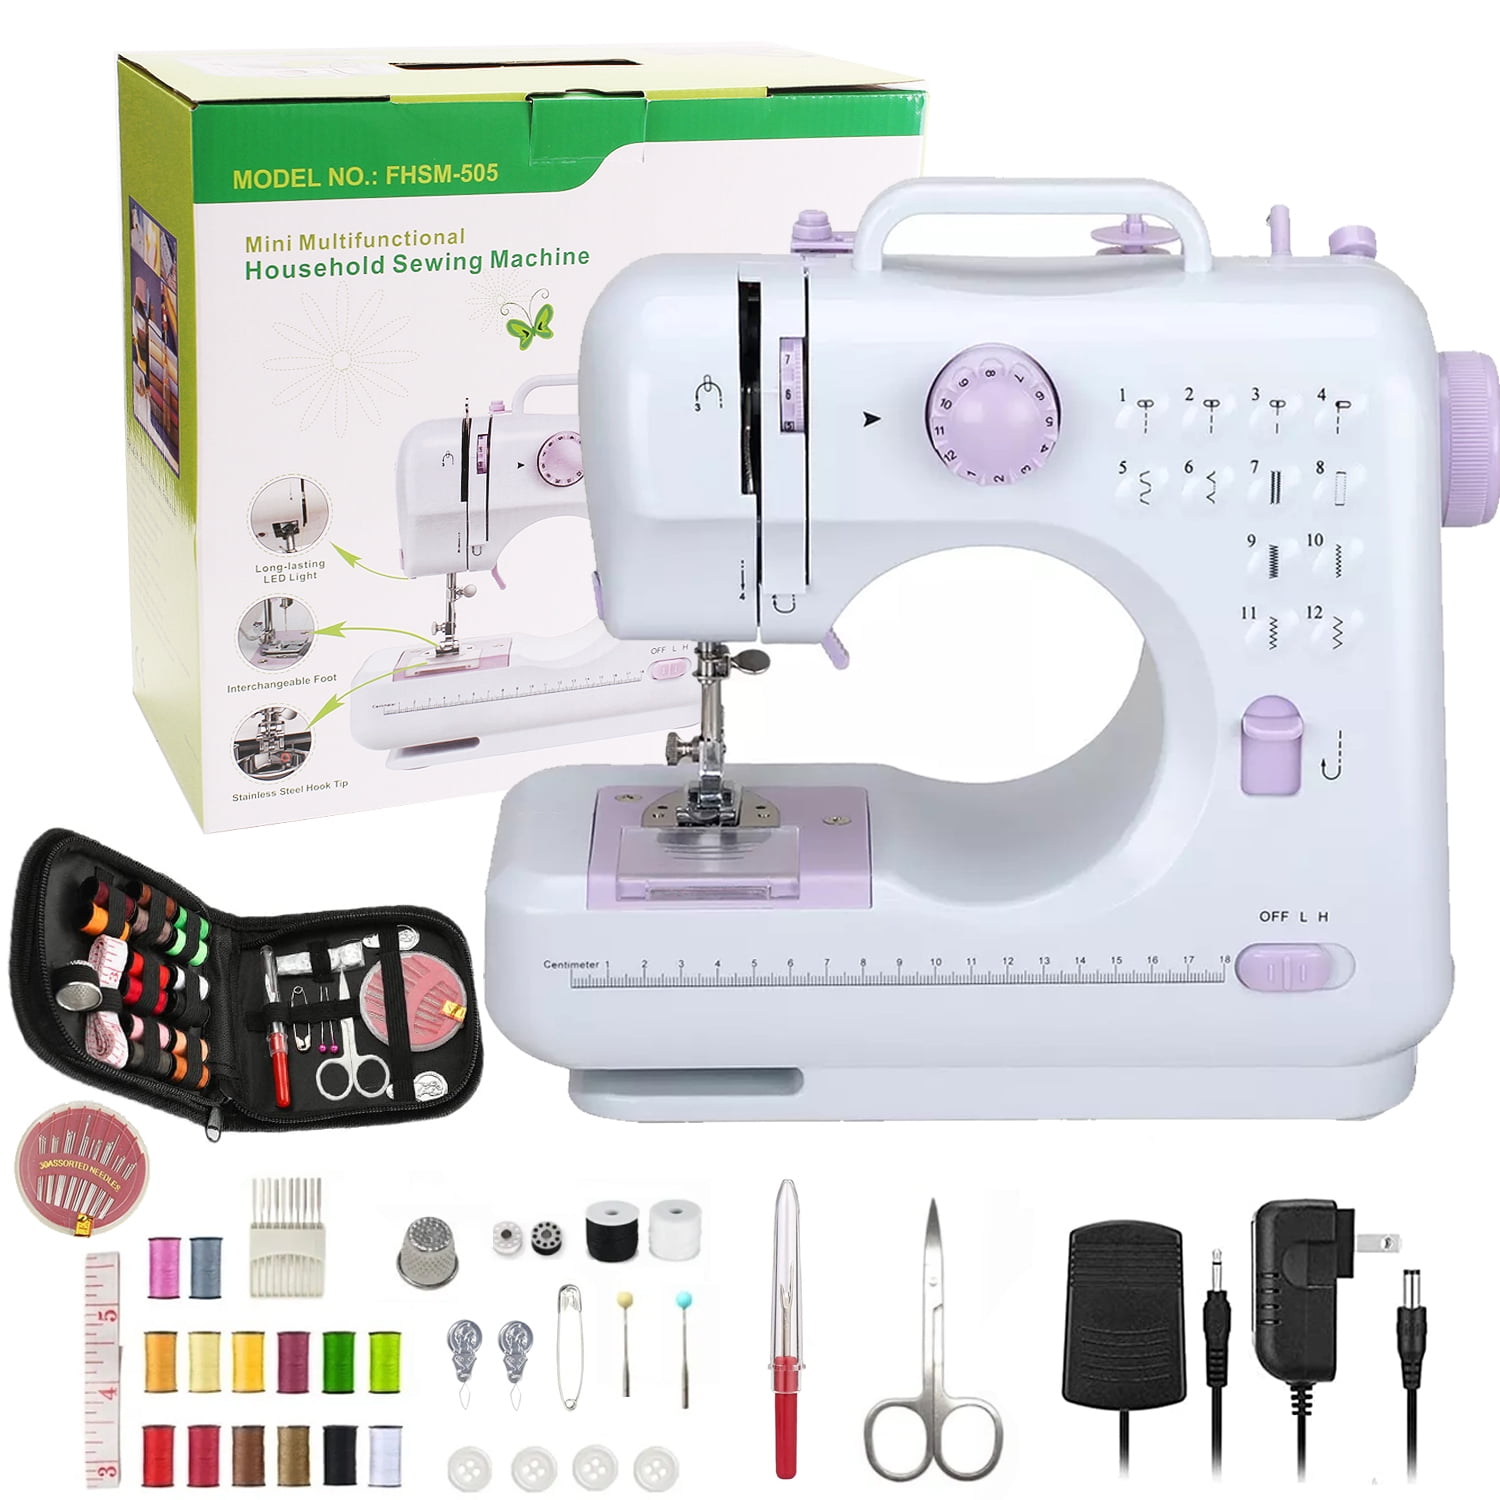 Mini Sewing Machine Review: Is It Worth The Money?